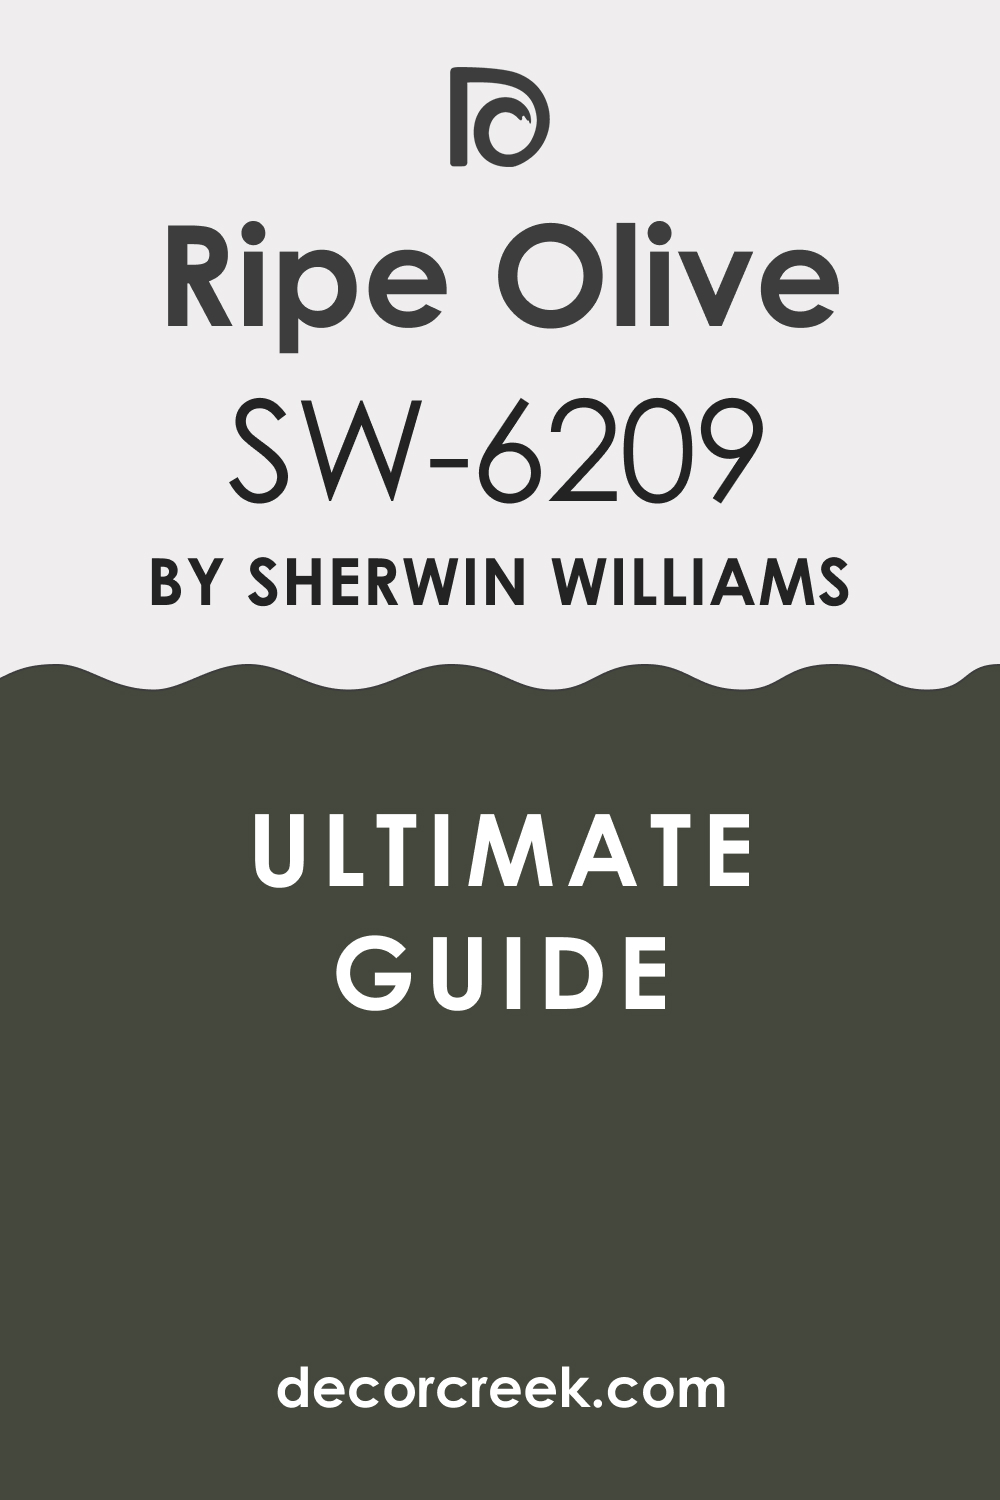 Ultimate Guide of Ripe Olive SW-6209 